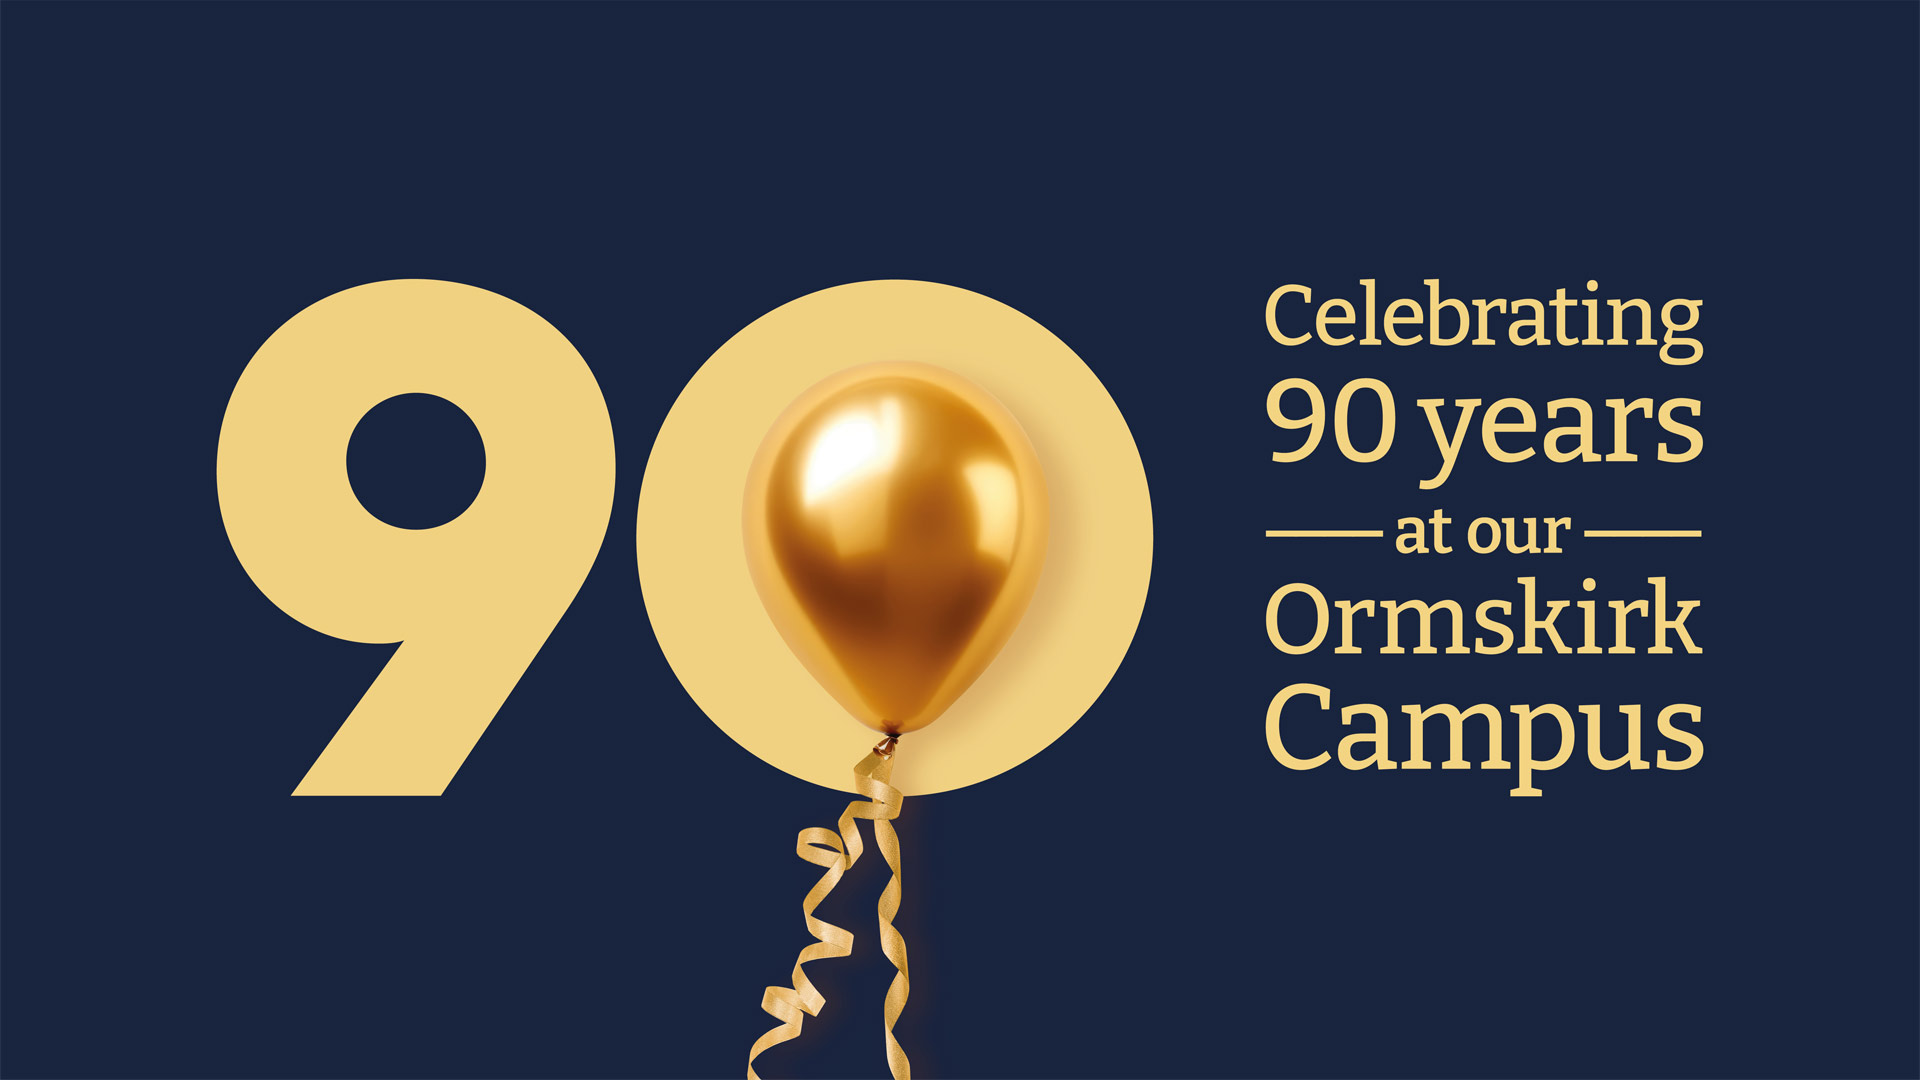 Celebrating 90 years at our Ormskirk campus